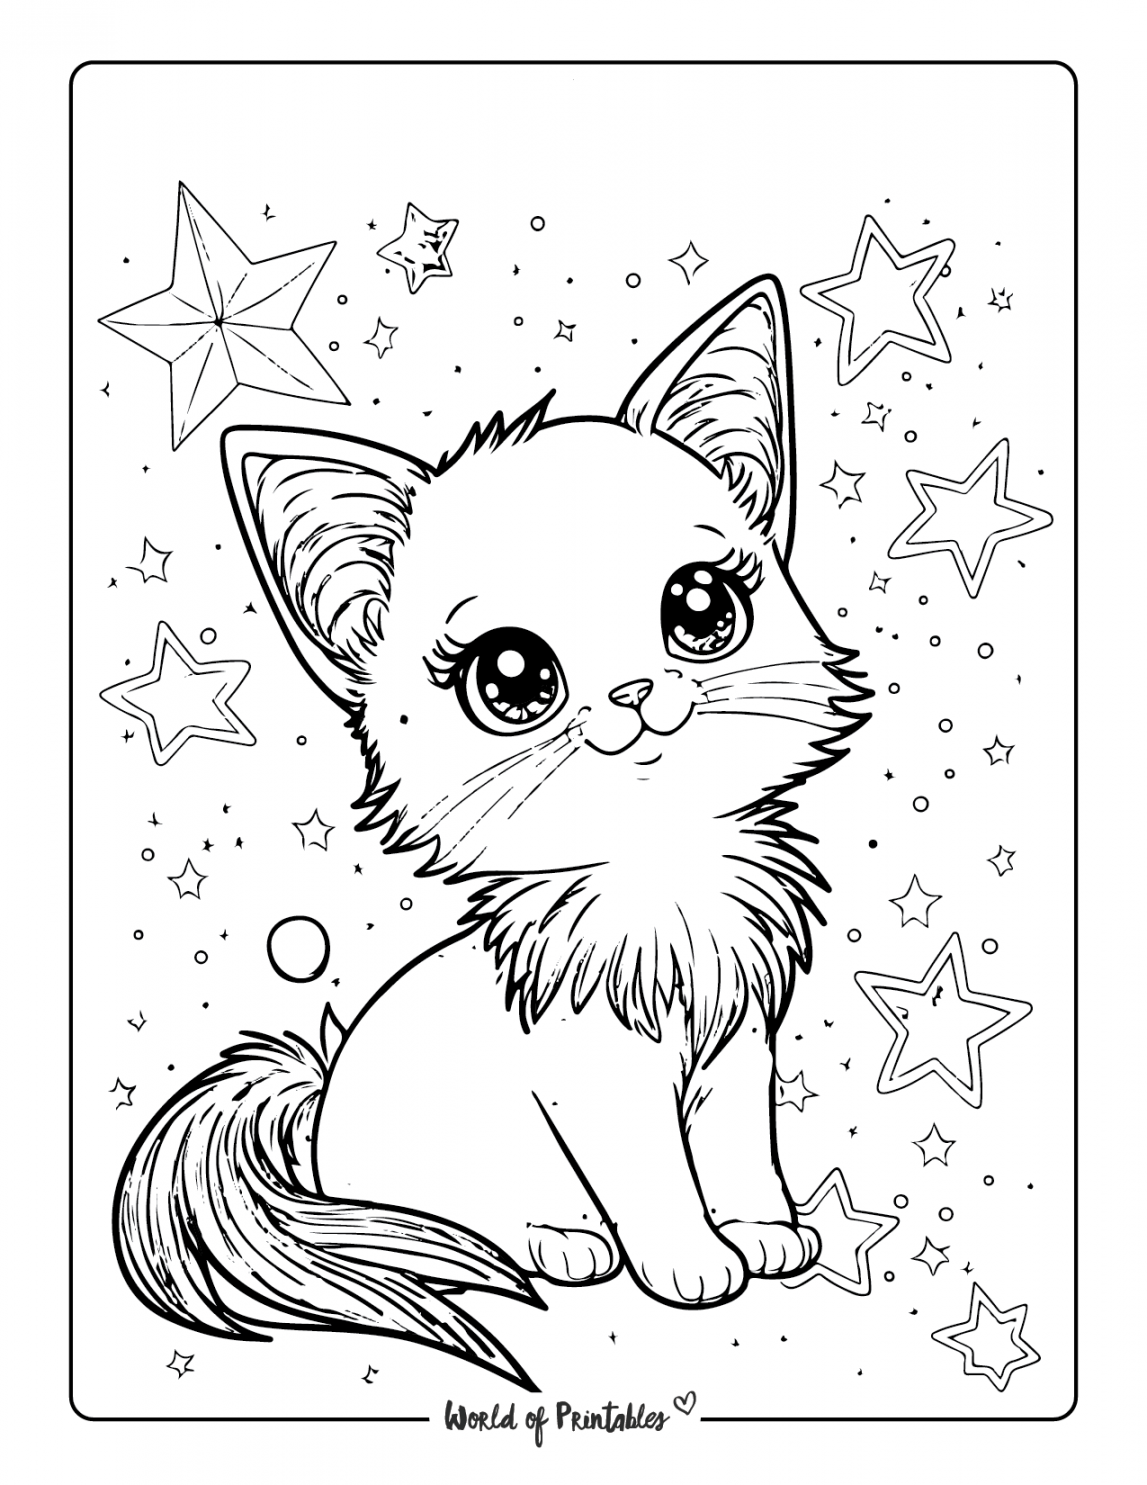 Cat Coloring Pages - World of Printables - FREE Printables - Free Printable Cat Coloring Pages